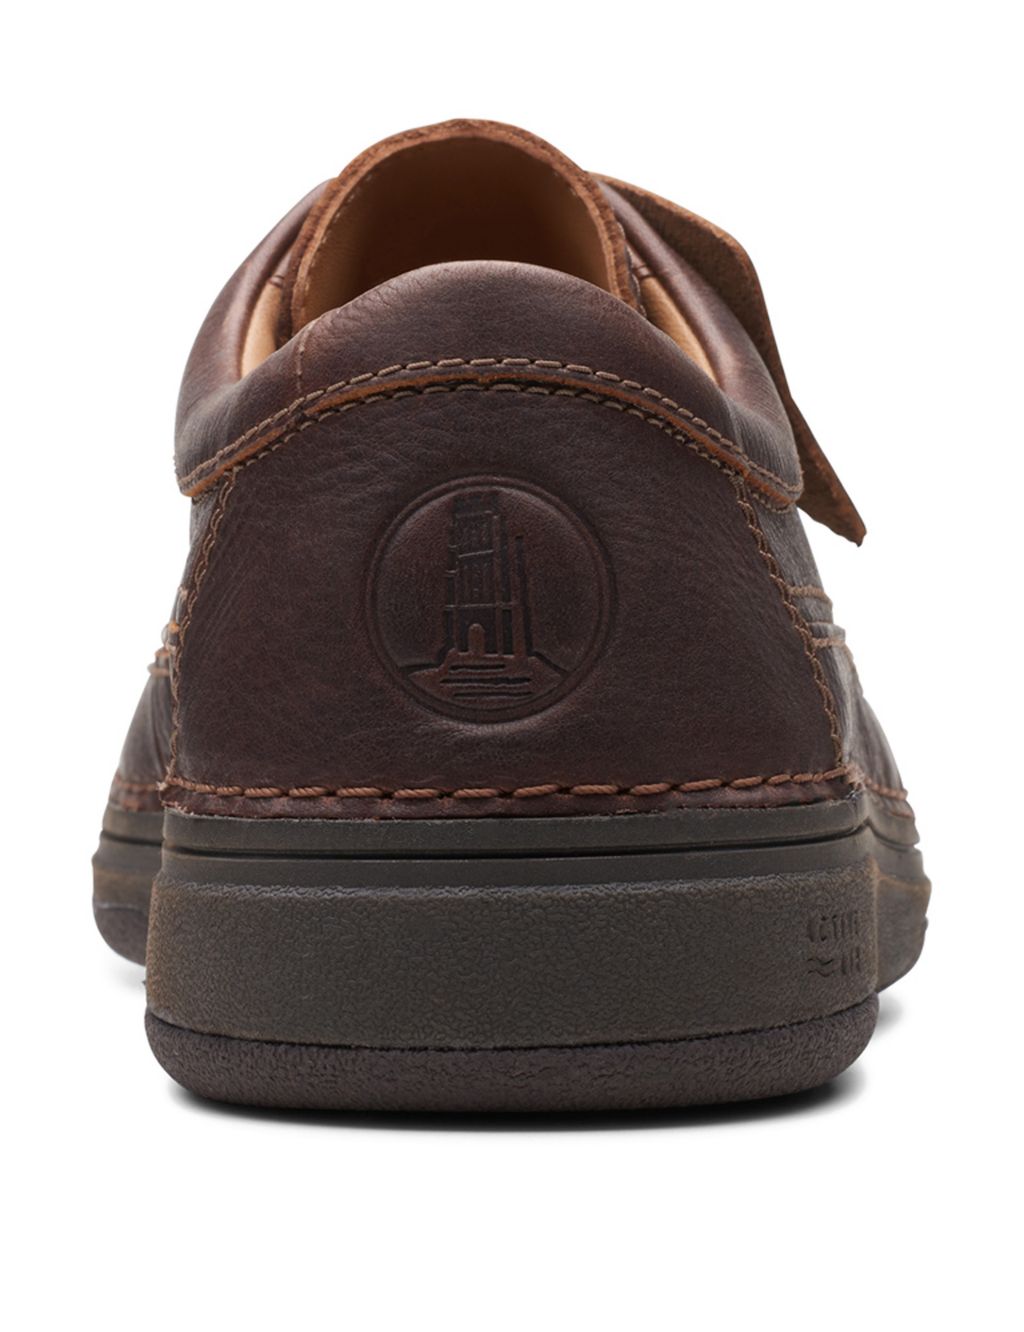 Leather Casual Shoes image 7